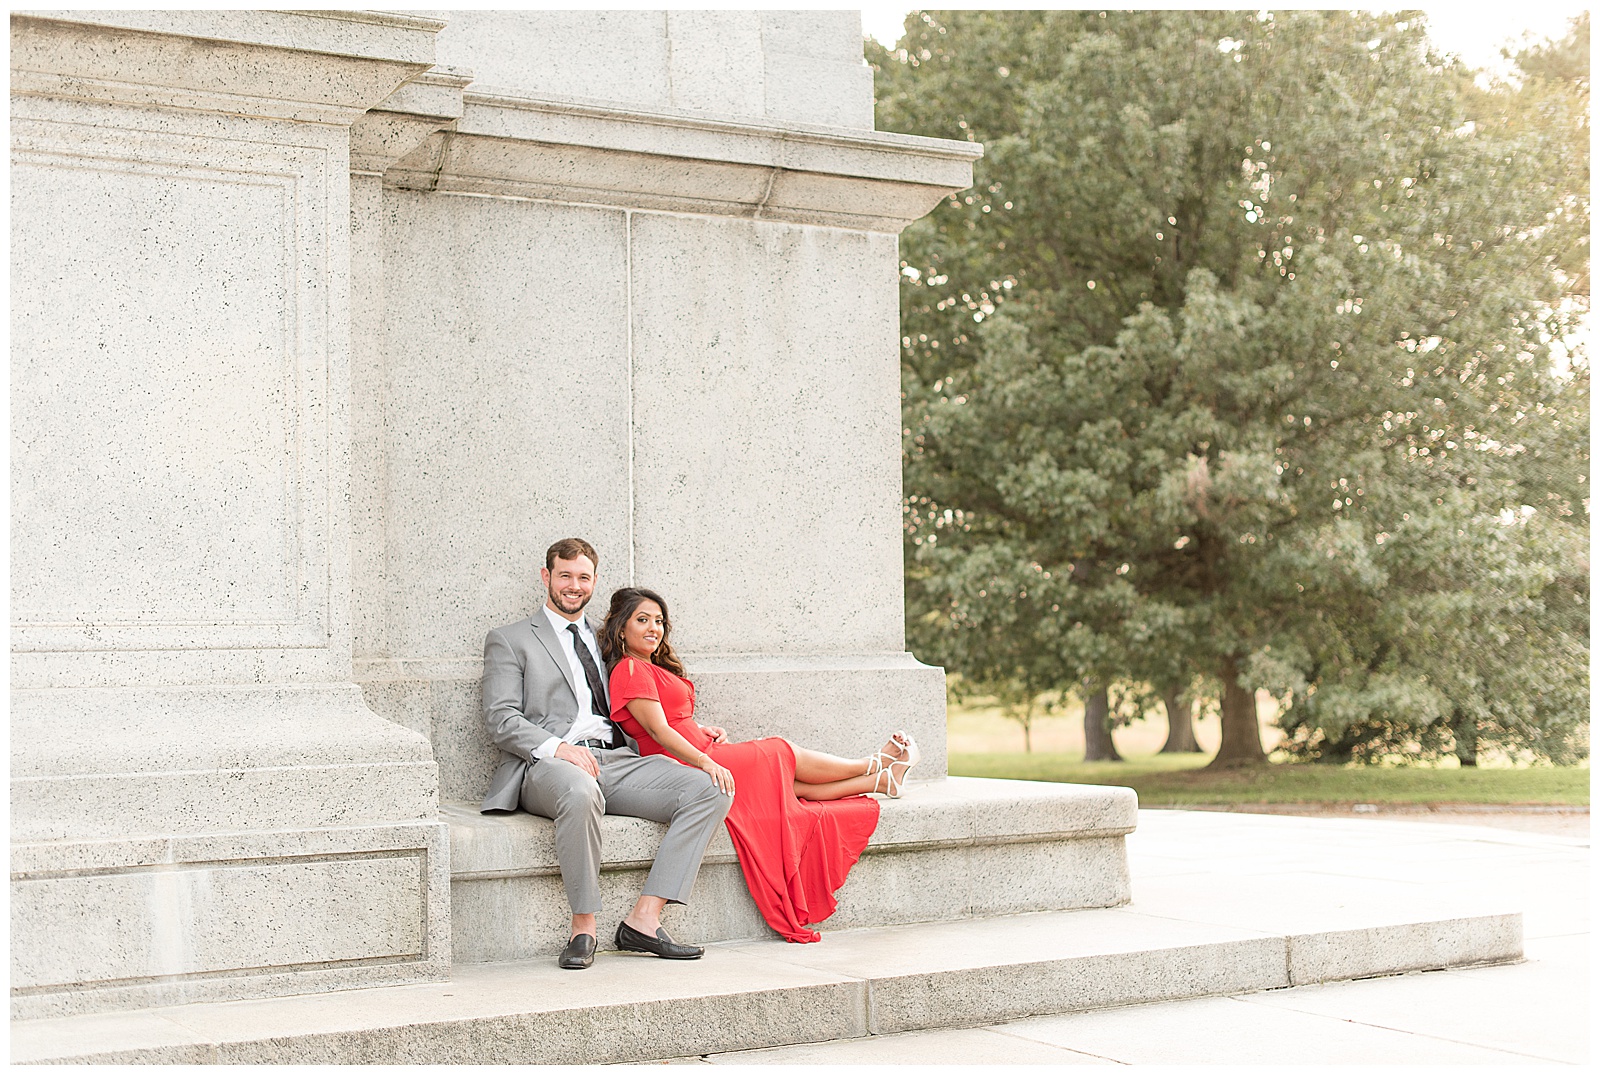 couple is sitting on archway bench with the guy on the left and the girl on the right and he is resting his right hand on his knee with his left arm around the girl and his feet are on the ground while the girl is on the right sitting with her legs extended out along the bench and feet are crossed as her red dress drapes over the bench and her right hand rests on his left knee and they are looking at the camera smiling with trees behind them to the right at the National Memorial Arch in Valley Forge, PA